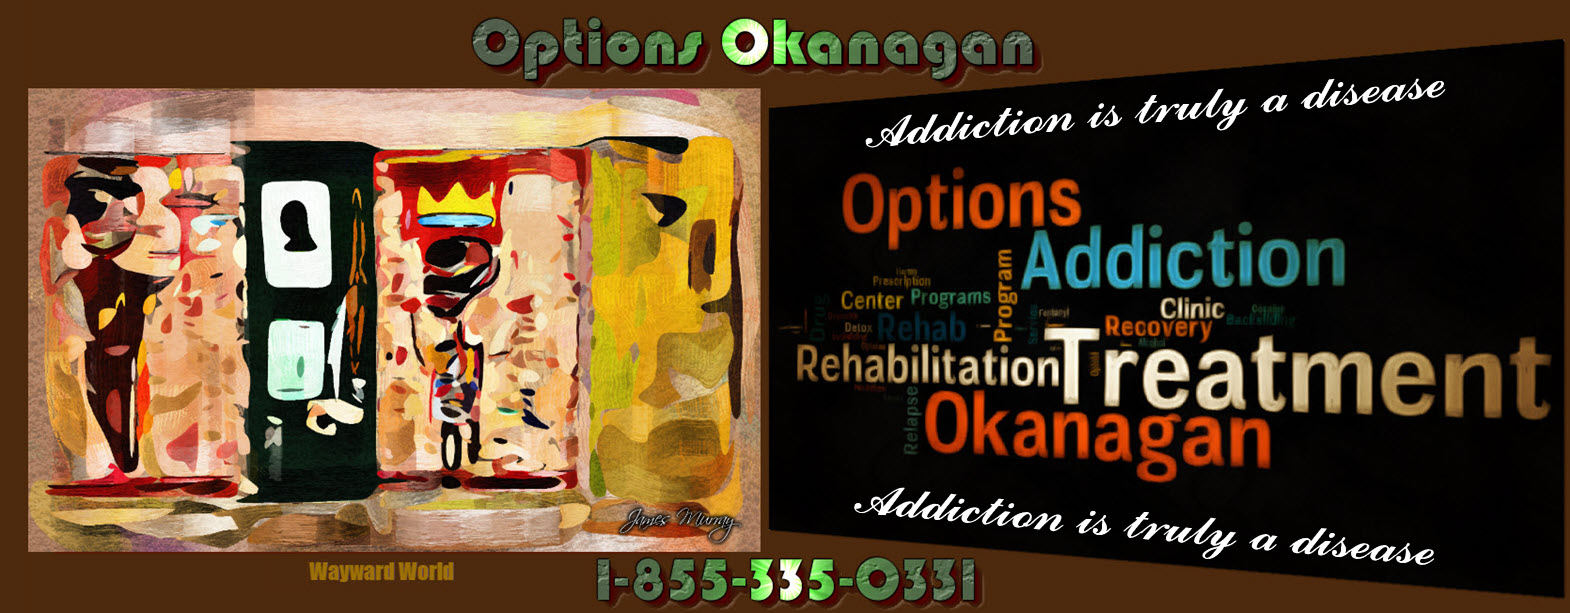 Teenagers Living with Drug addiction and Addiction Aftercare and Continuing Care in Red Deer, Edmonton and Calgary, Alberta